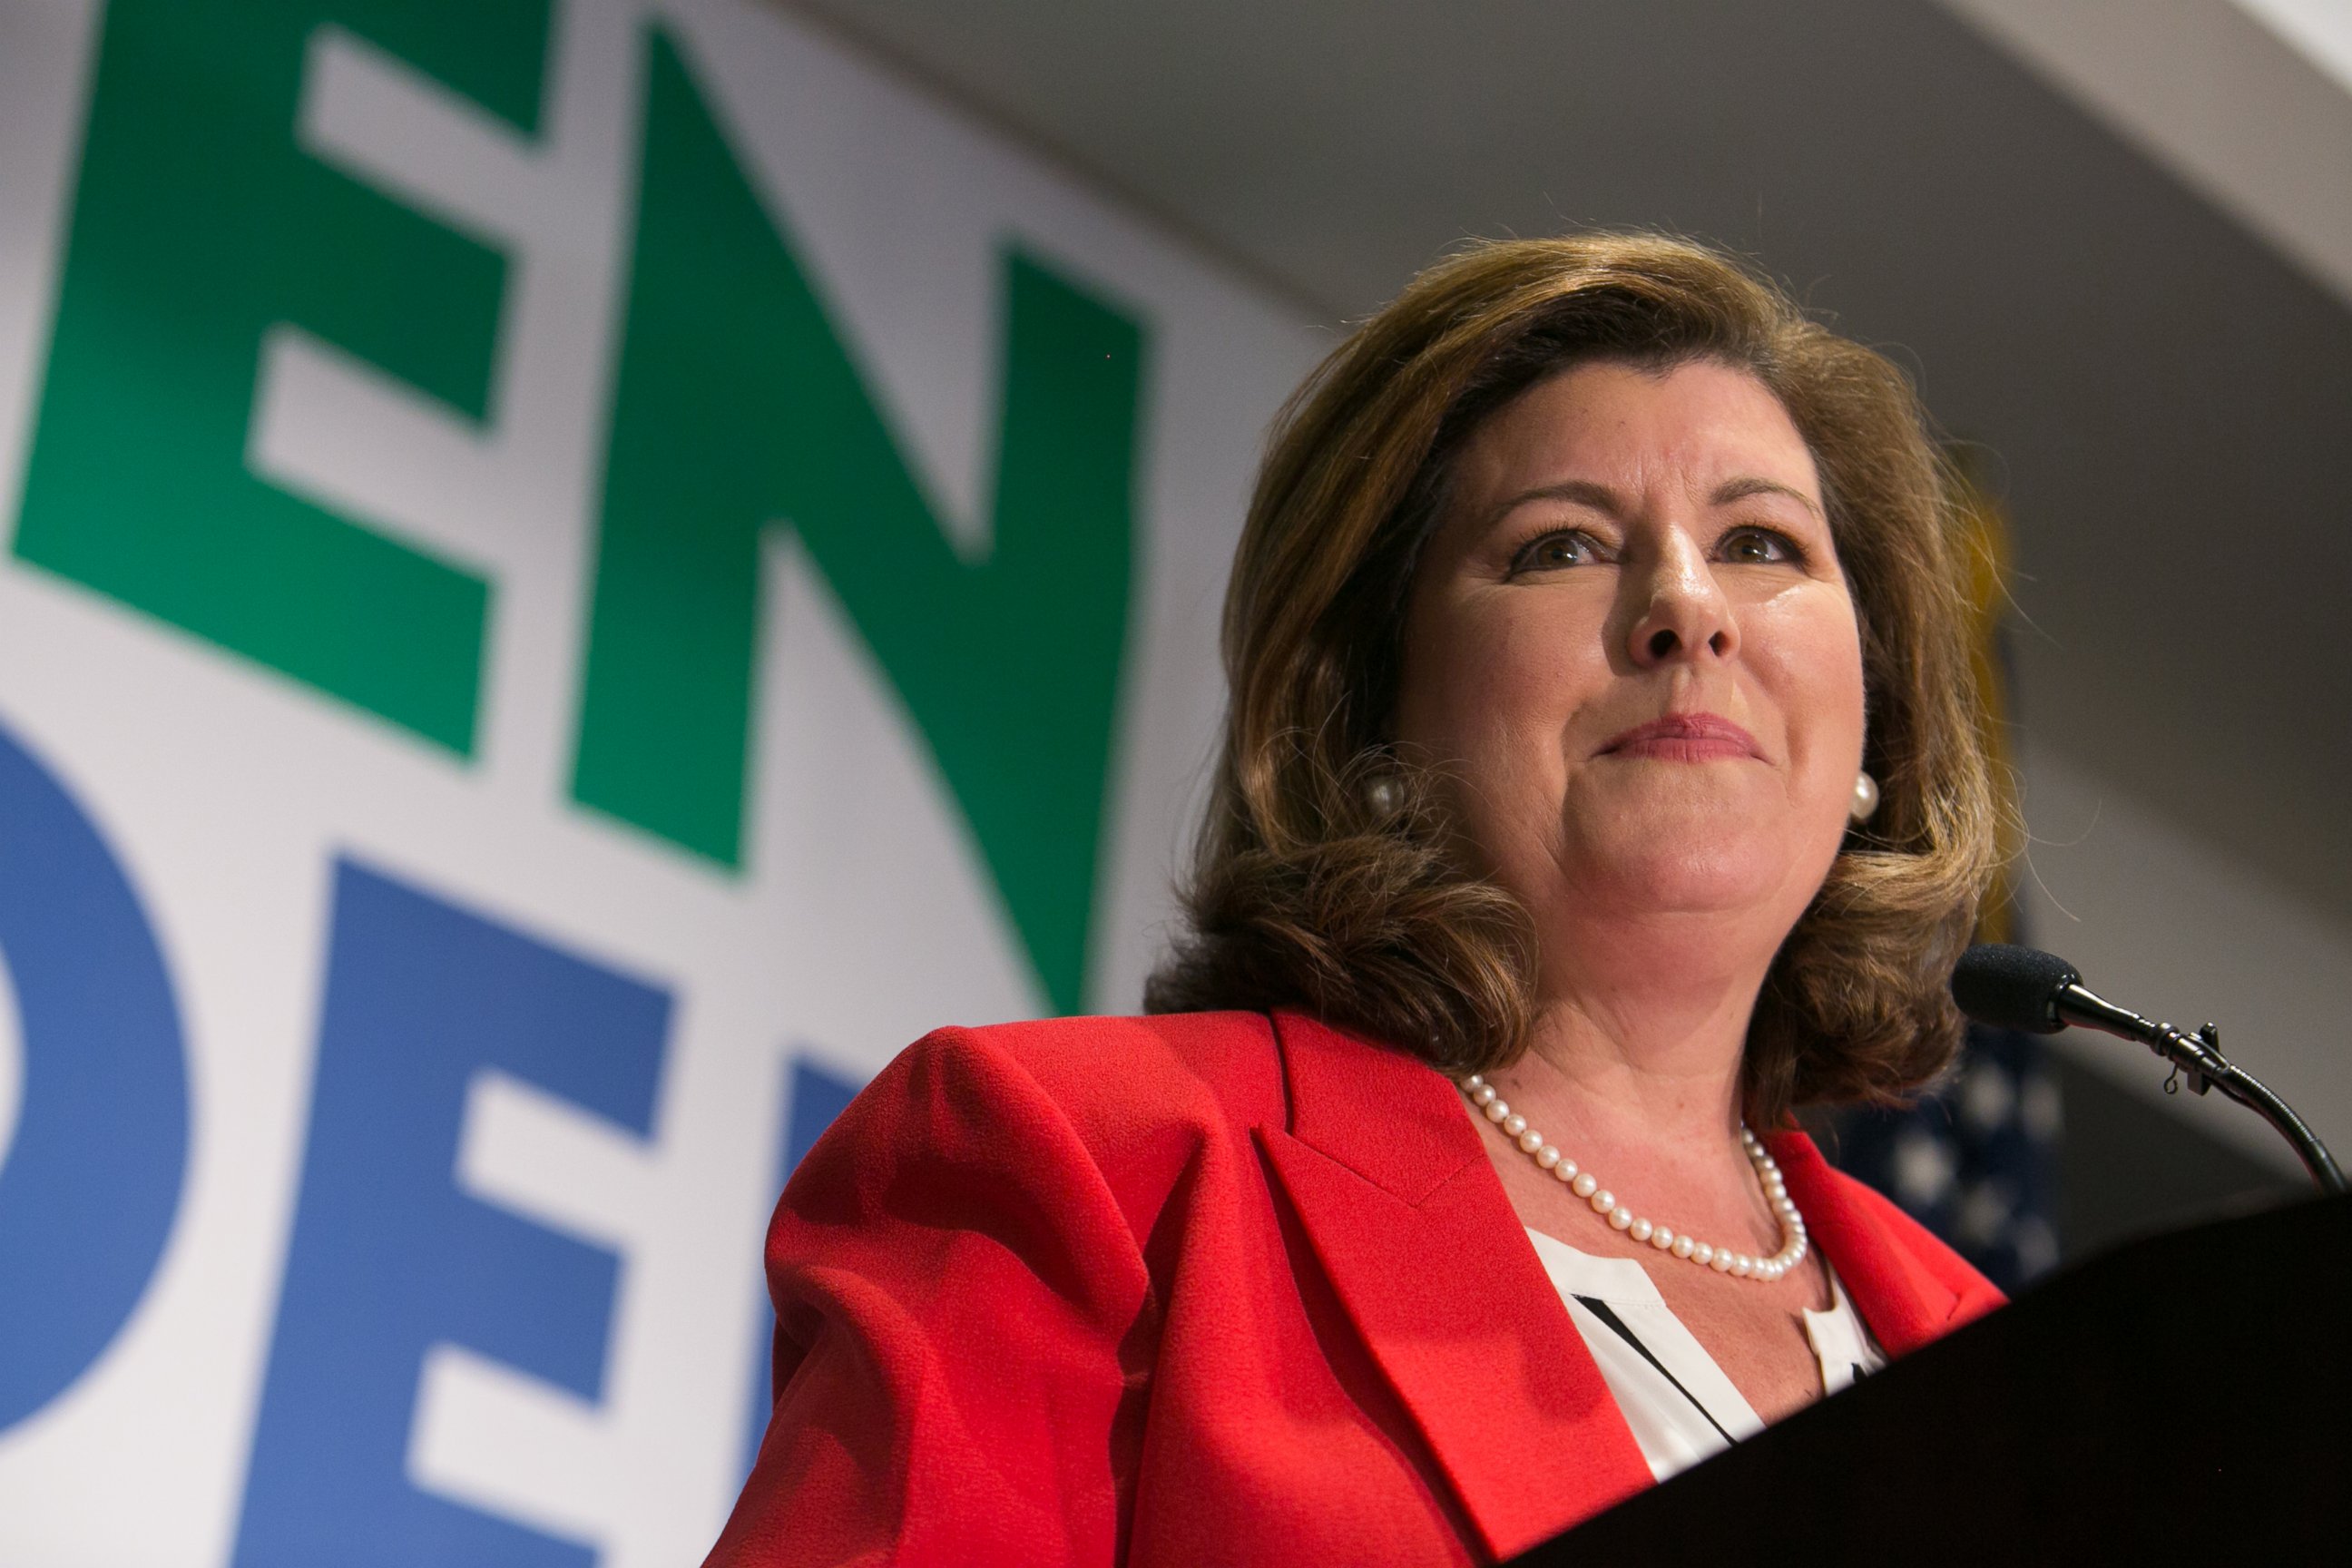 PHOTO: Georgia's 6th Congressional district Republican candidate Karen Handel gives a victory speech to supporters gathered at the Hyatt Regency at Villa Christina, June 20, 2017, in Atlanta.